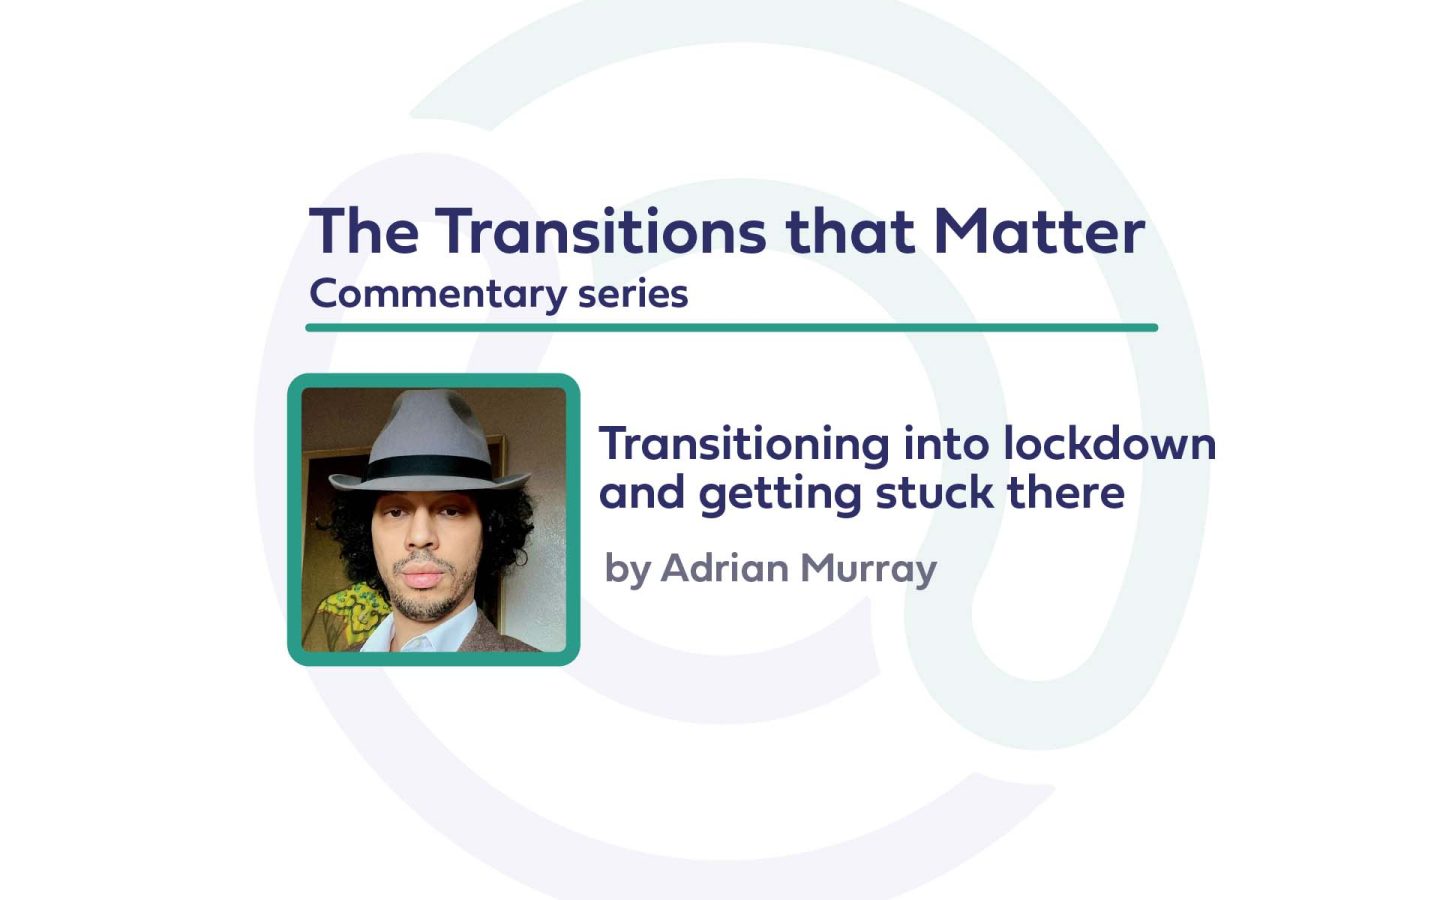 Text: The Transitions that Matter commentary series 'Transitioning into lockdown and getting stuck there, by Adrian Murray'